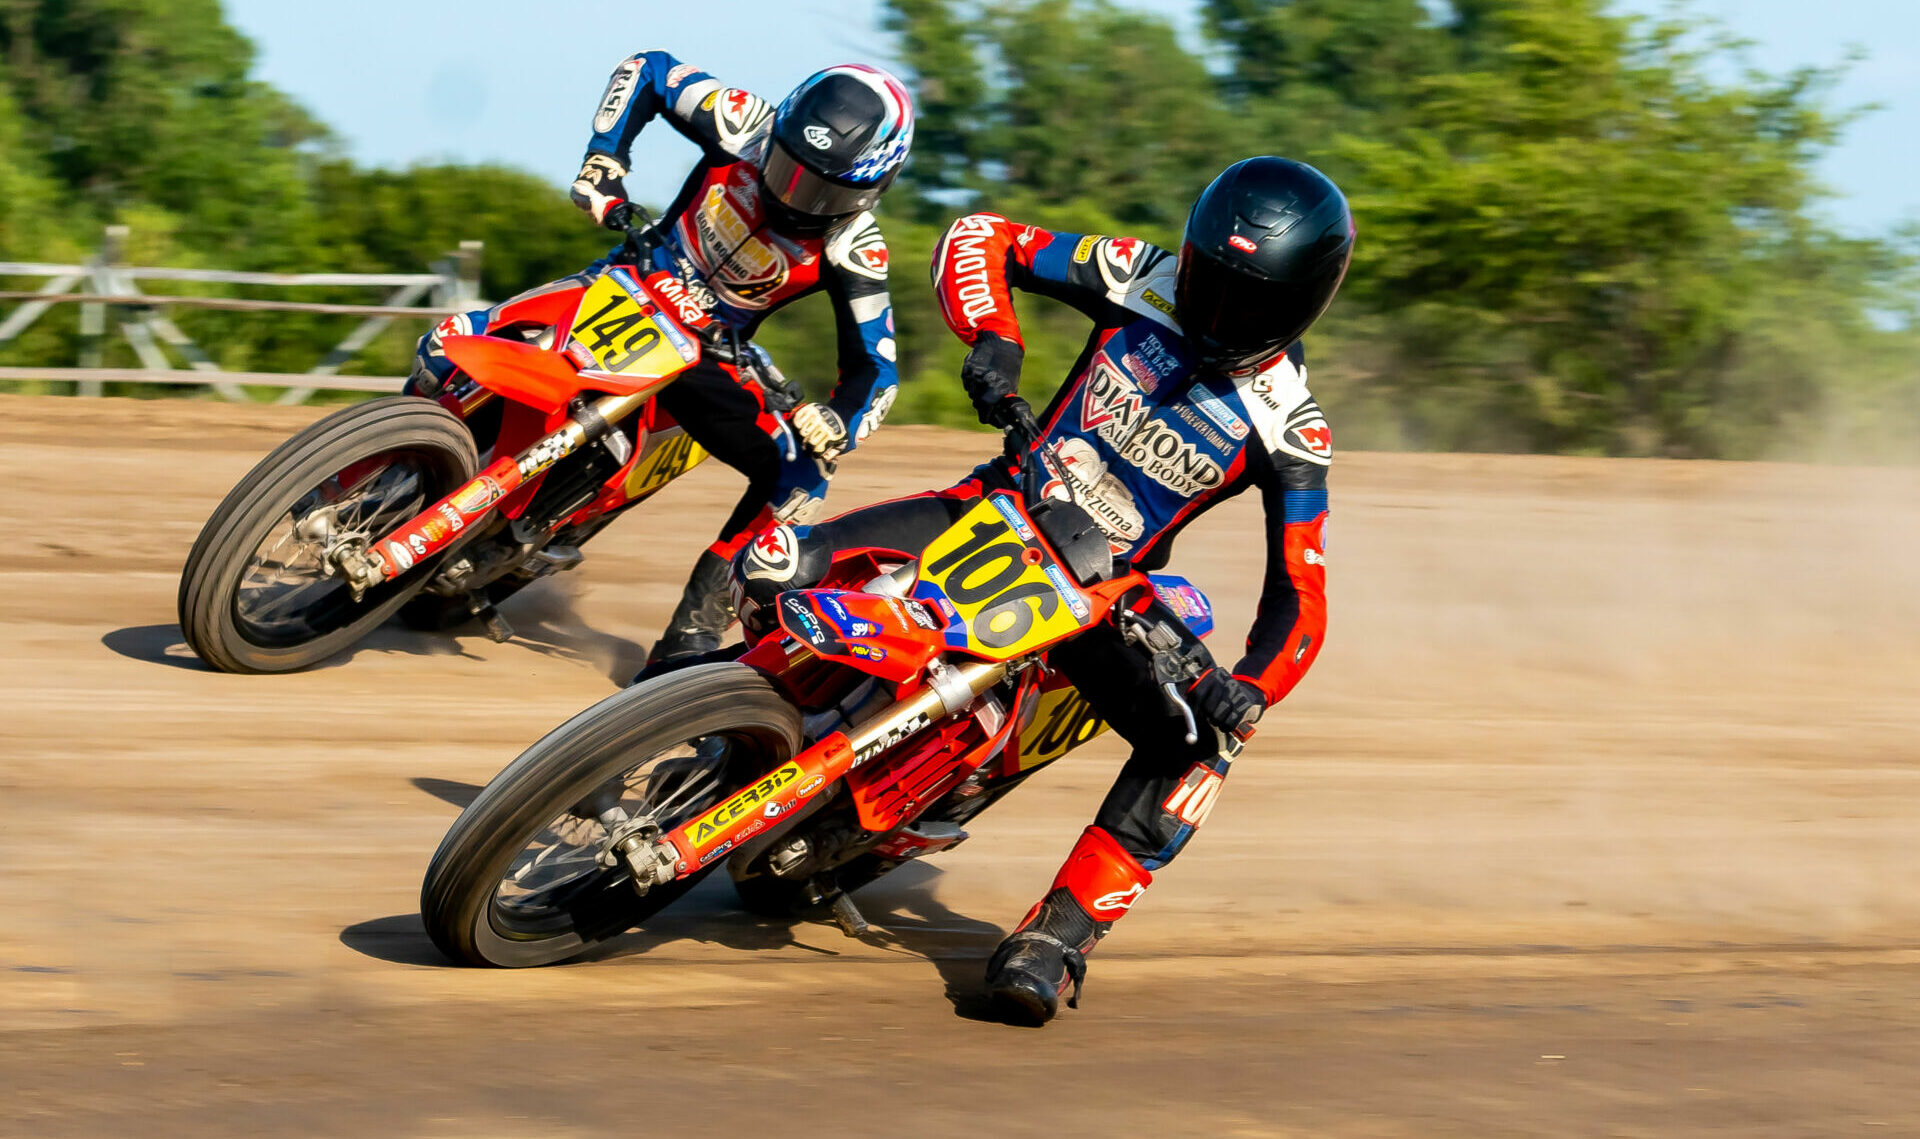 Reece Pottorf (106) and Treygan Birdsong (149) in action during a flat track race at Osborne Speedway, in Osborne, Kansas, in 2023. Photo by James Briary, courtesy XFT/NFT.